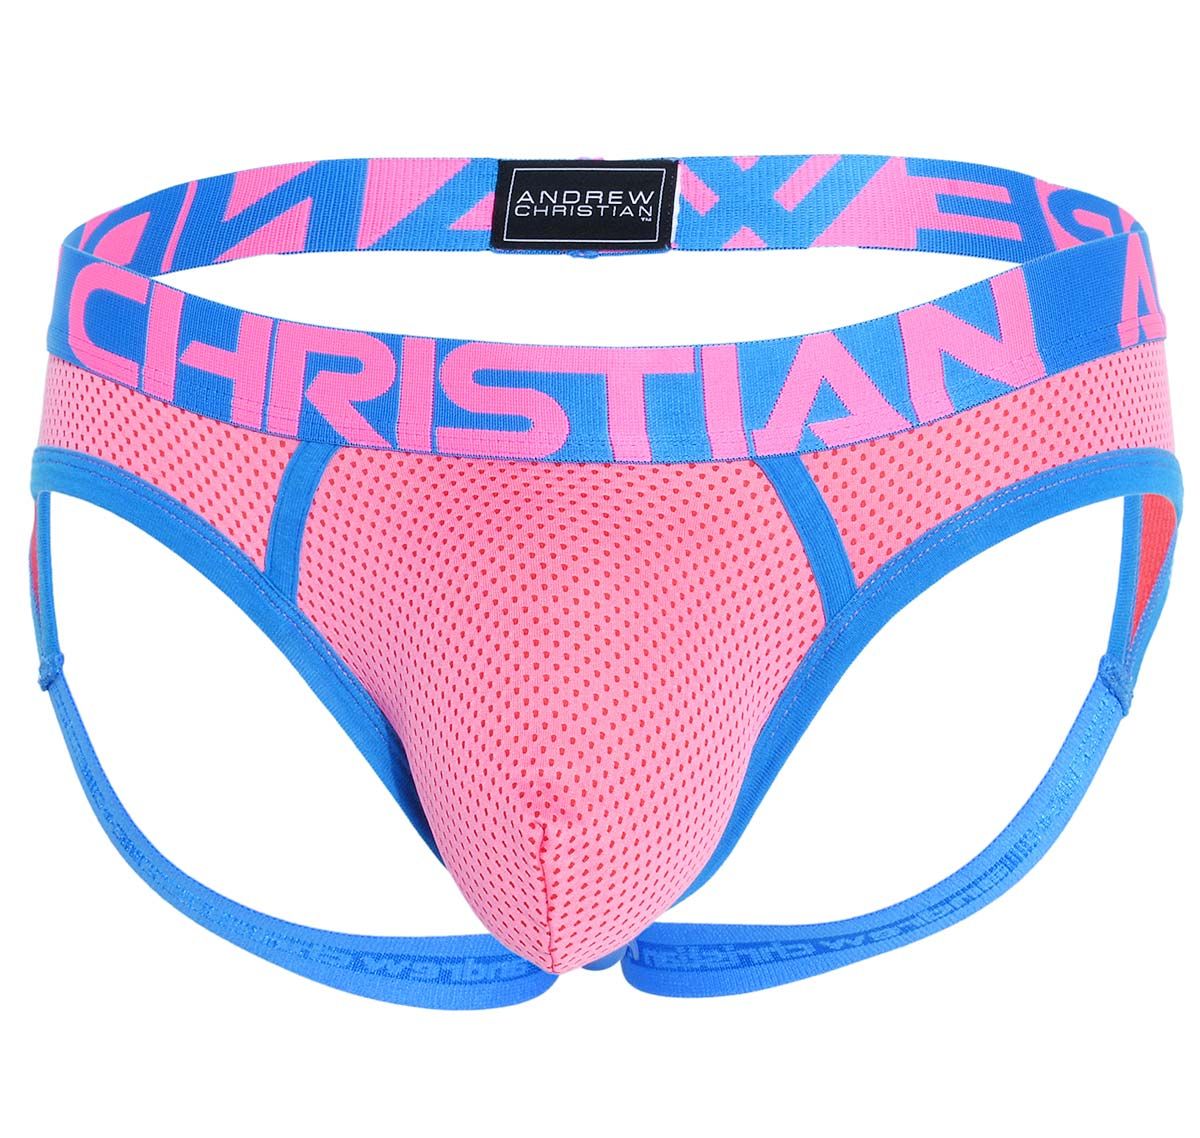 Andrew Christian Suspensorio CANDY POP MESH FRAME JOCK w/ Almost Naked 91810, rosa